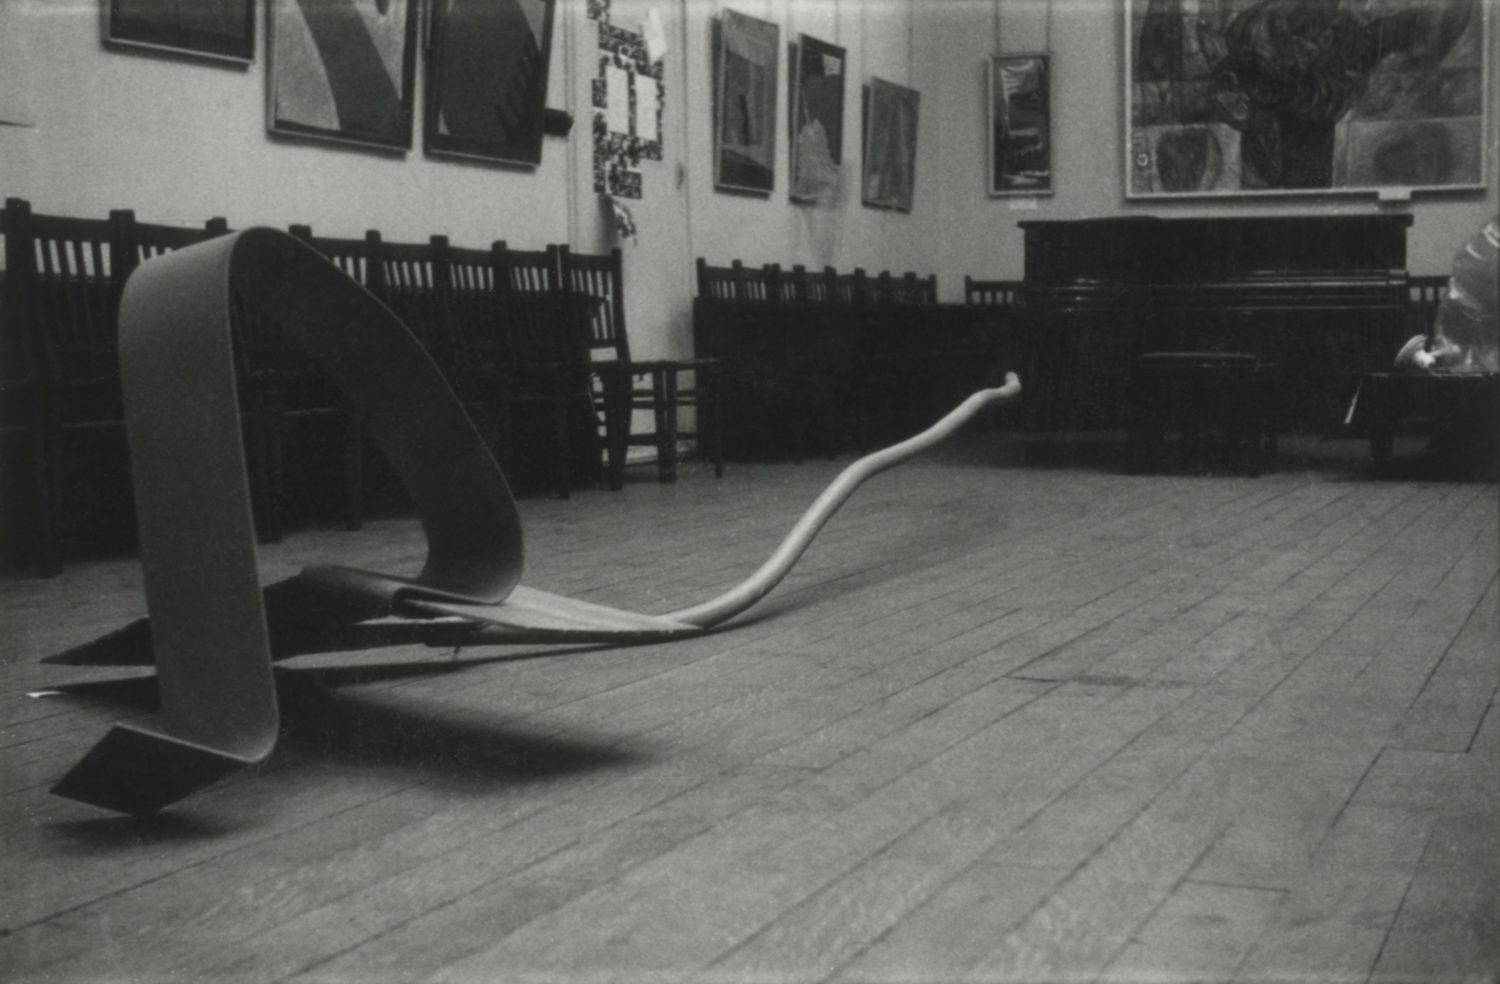 Records of Sculpture (1964 – 1969)